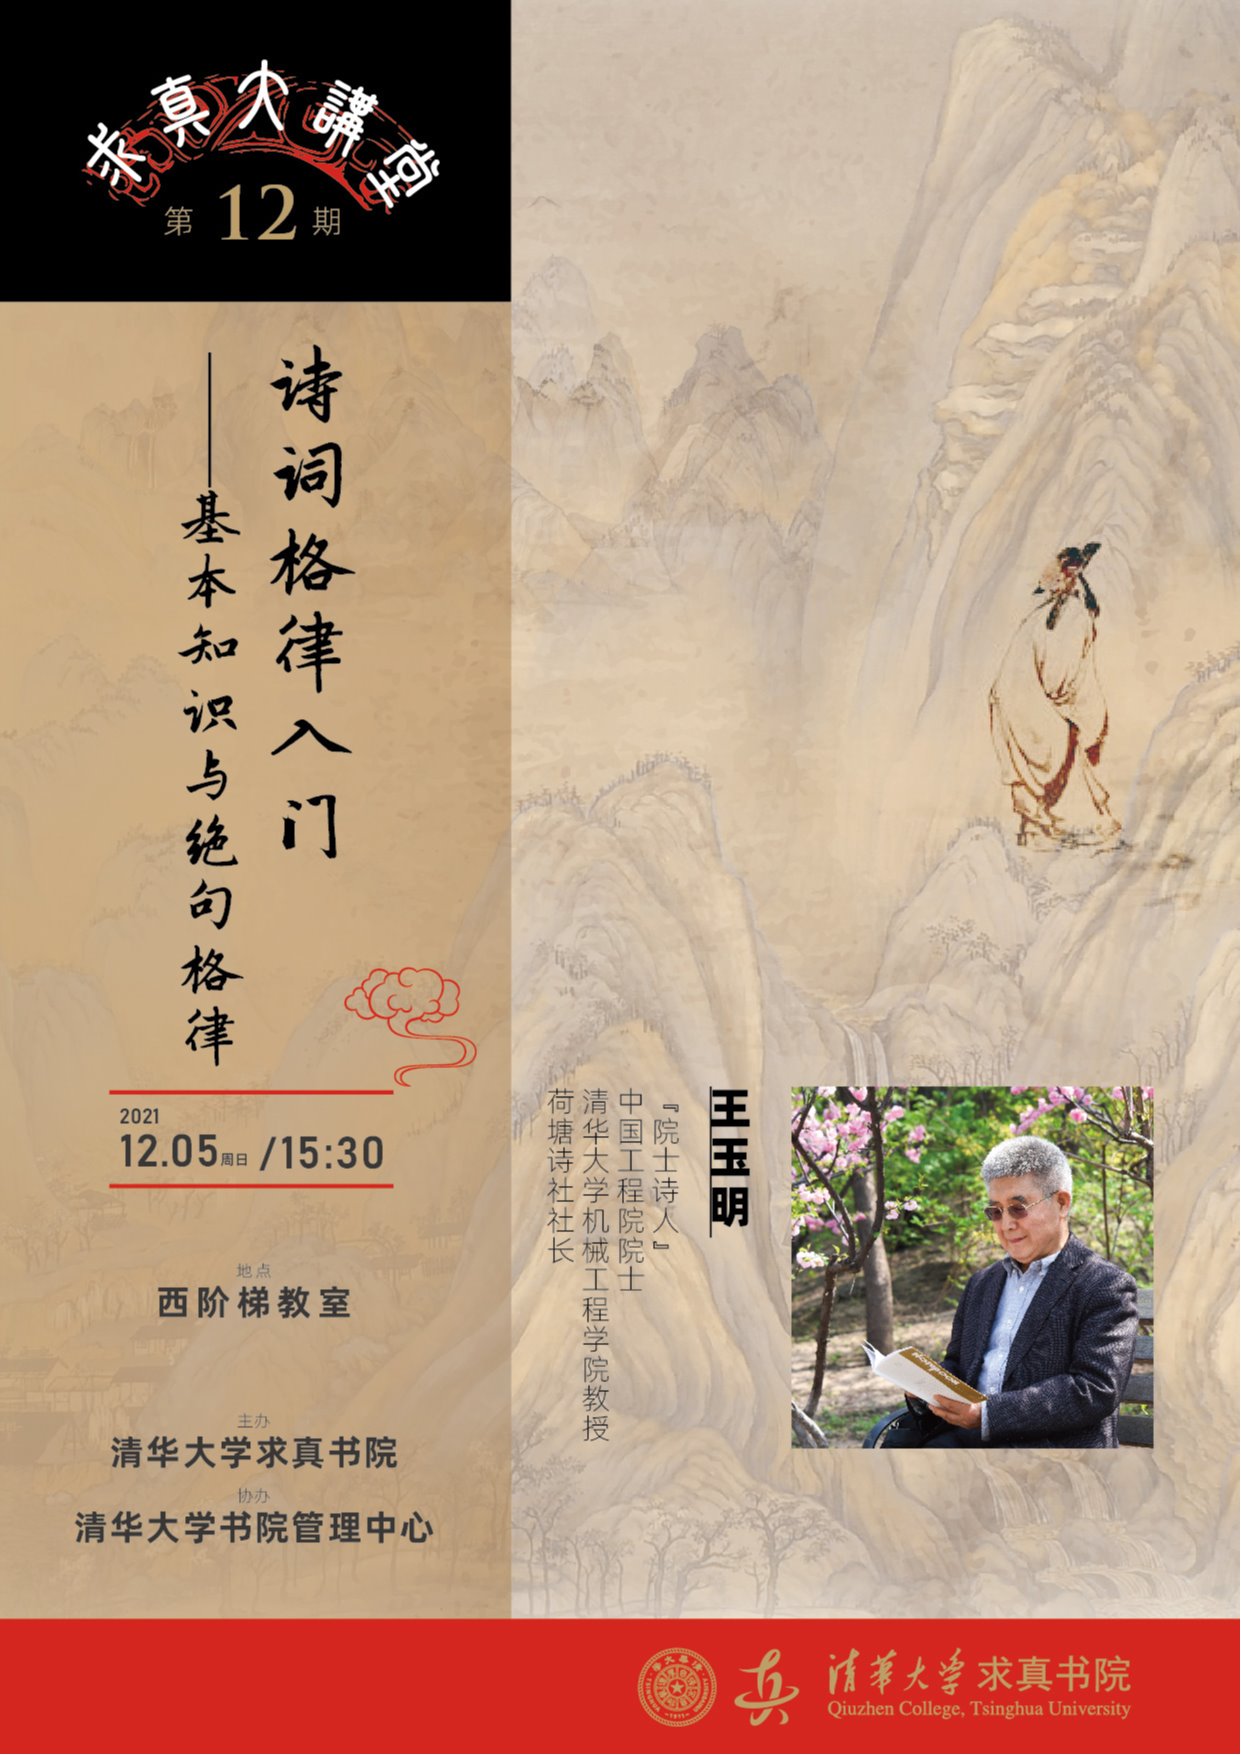 Introduction to Chinese poetic prosody: the basics and patterns of Jueju poems